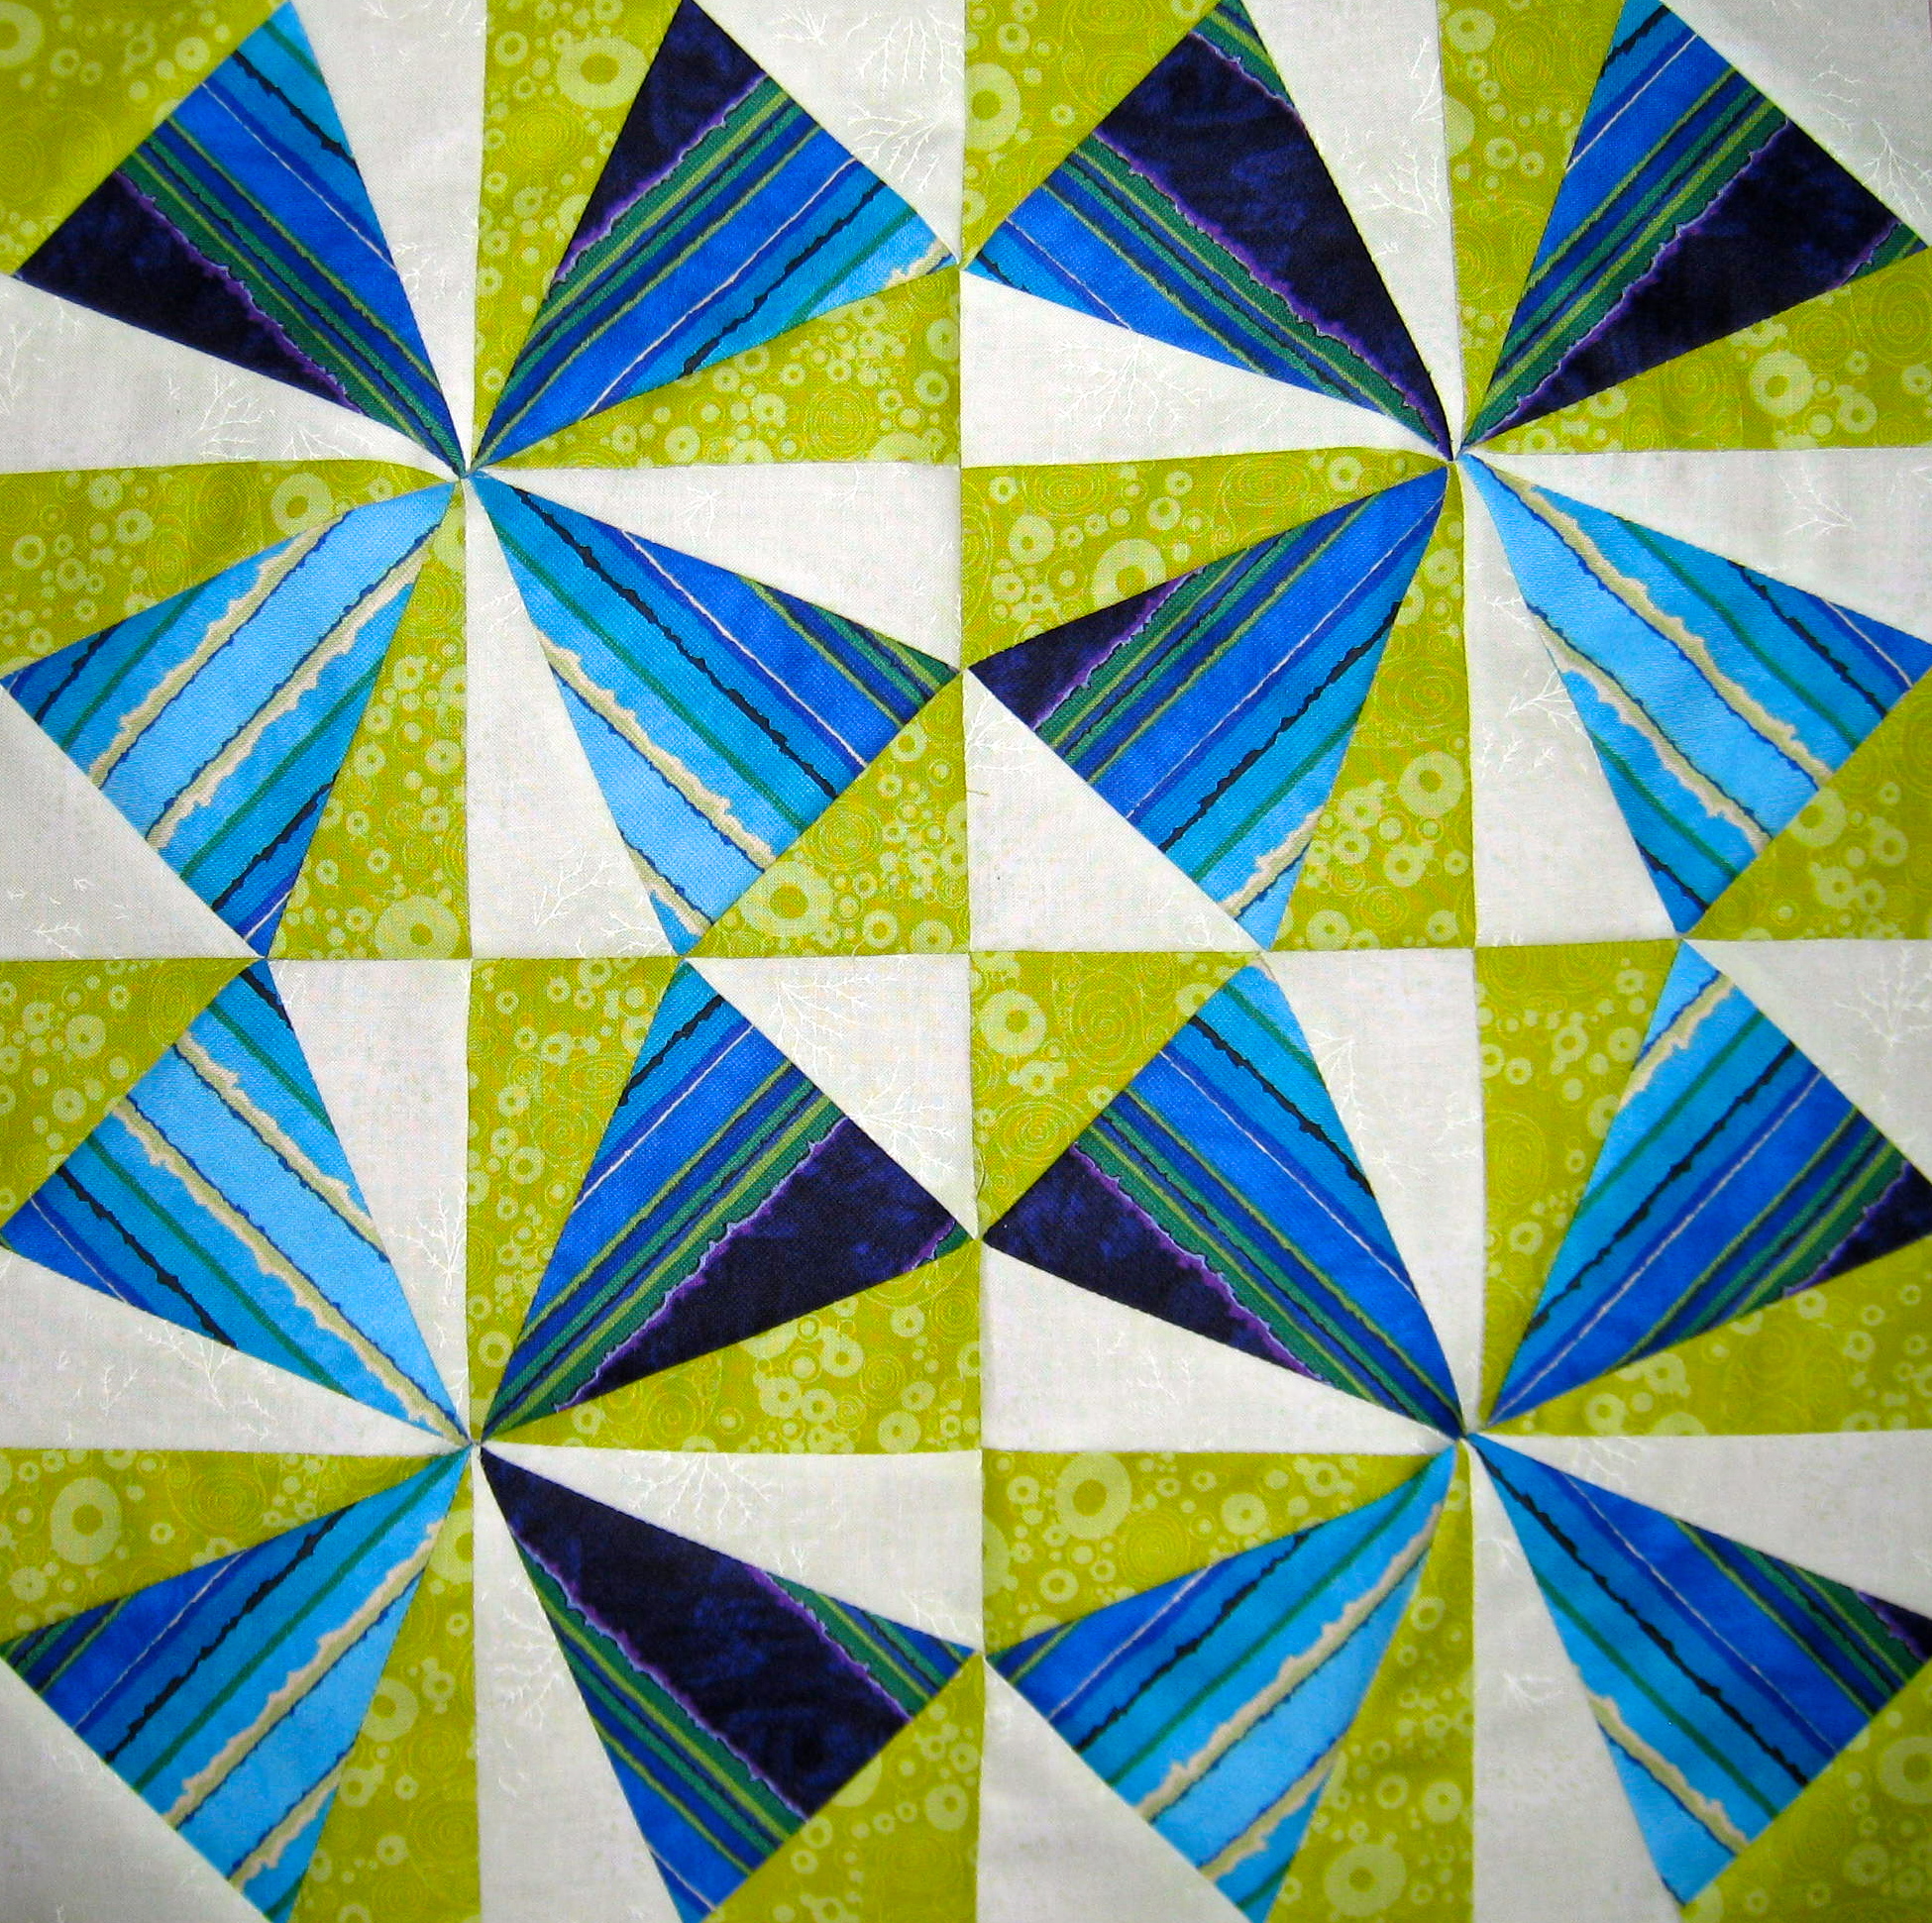 kalidescope triangles in blue and green